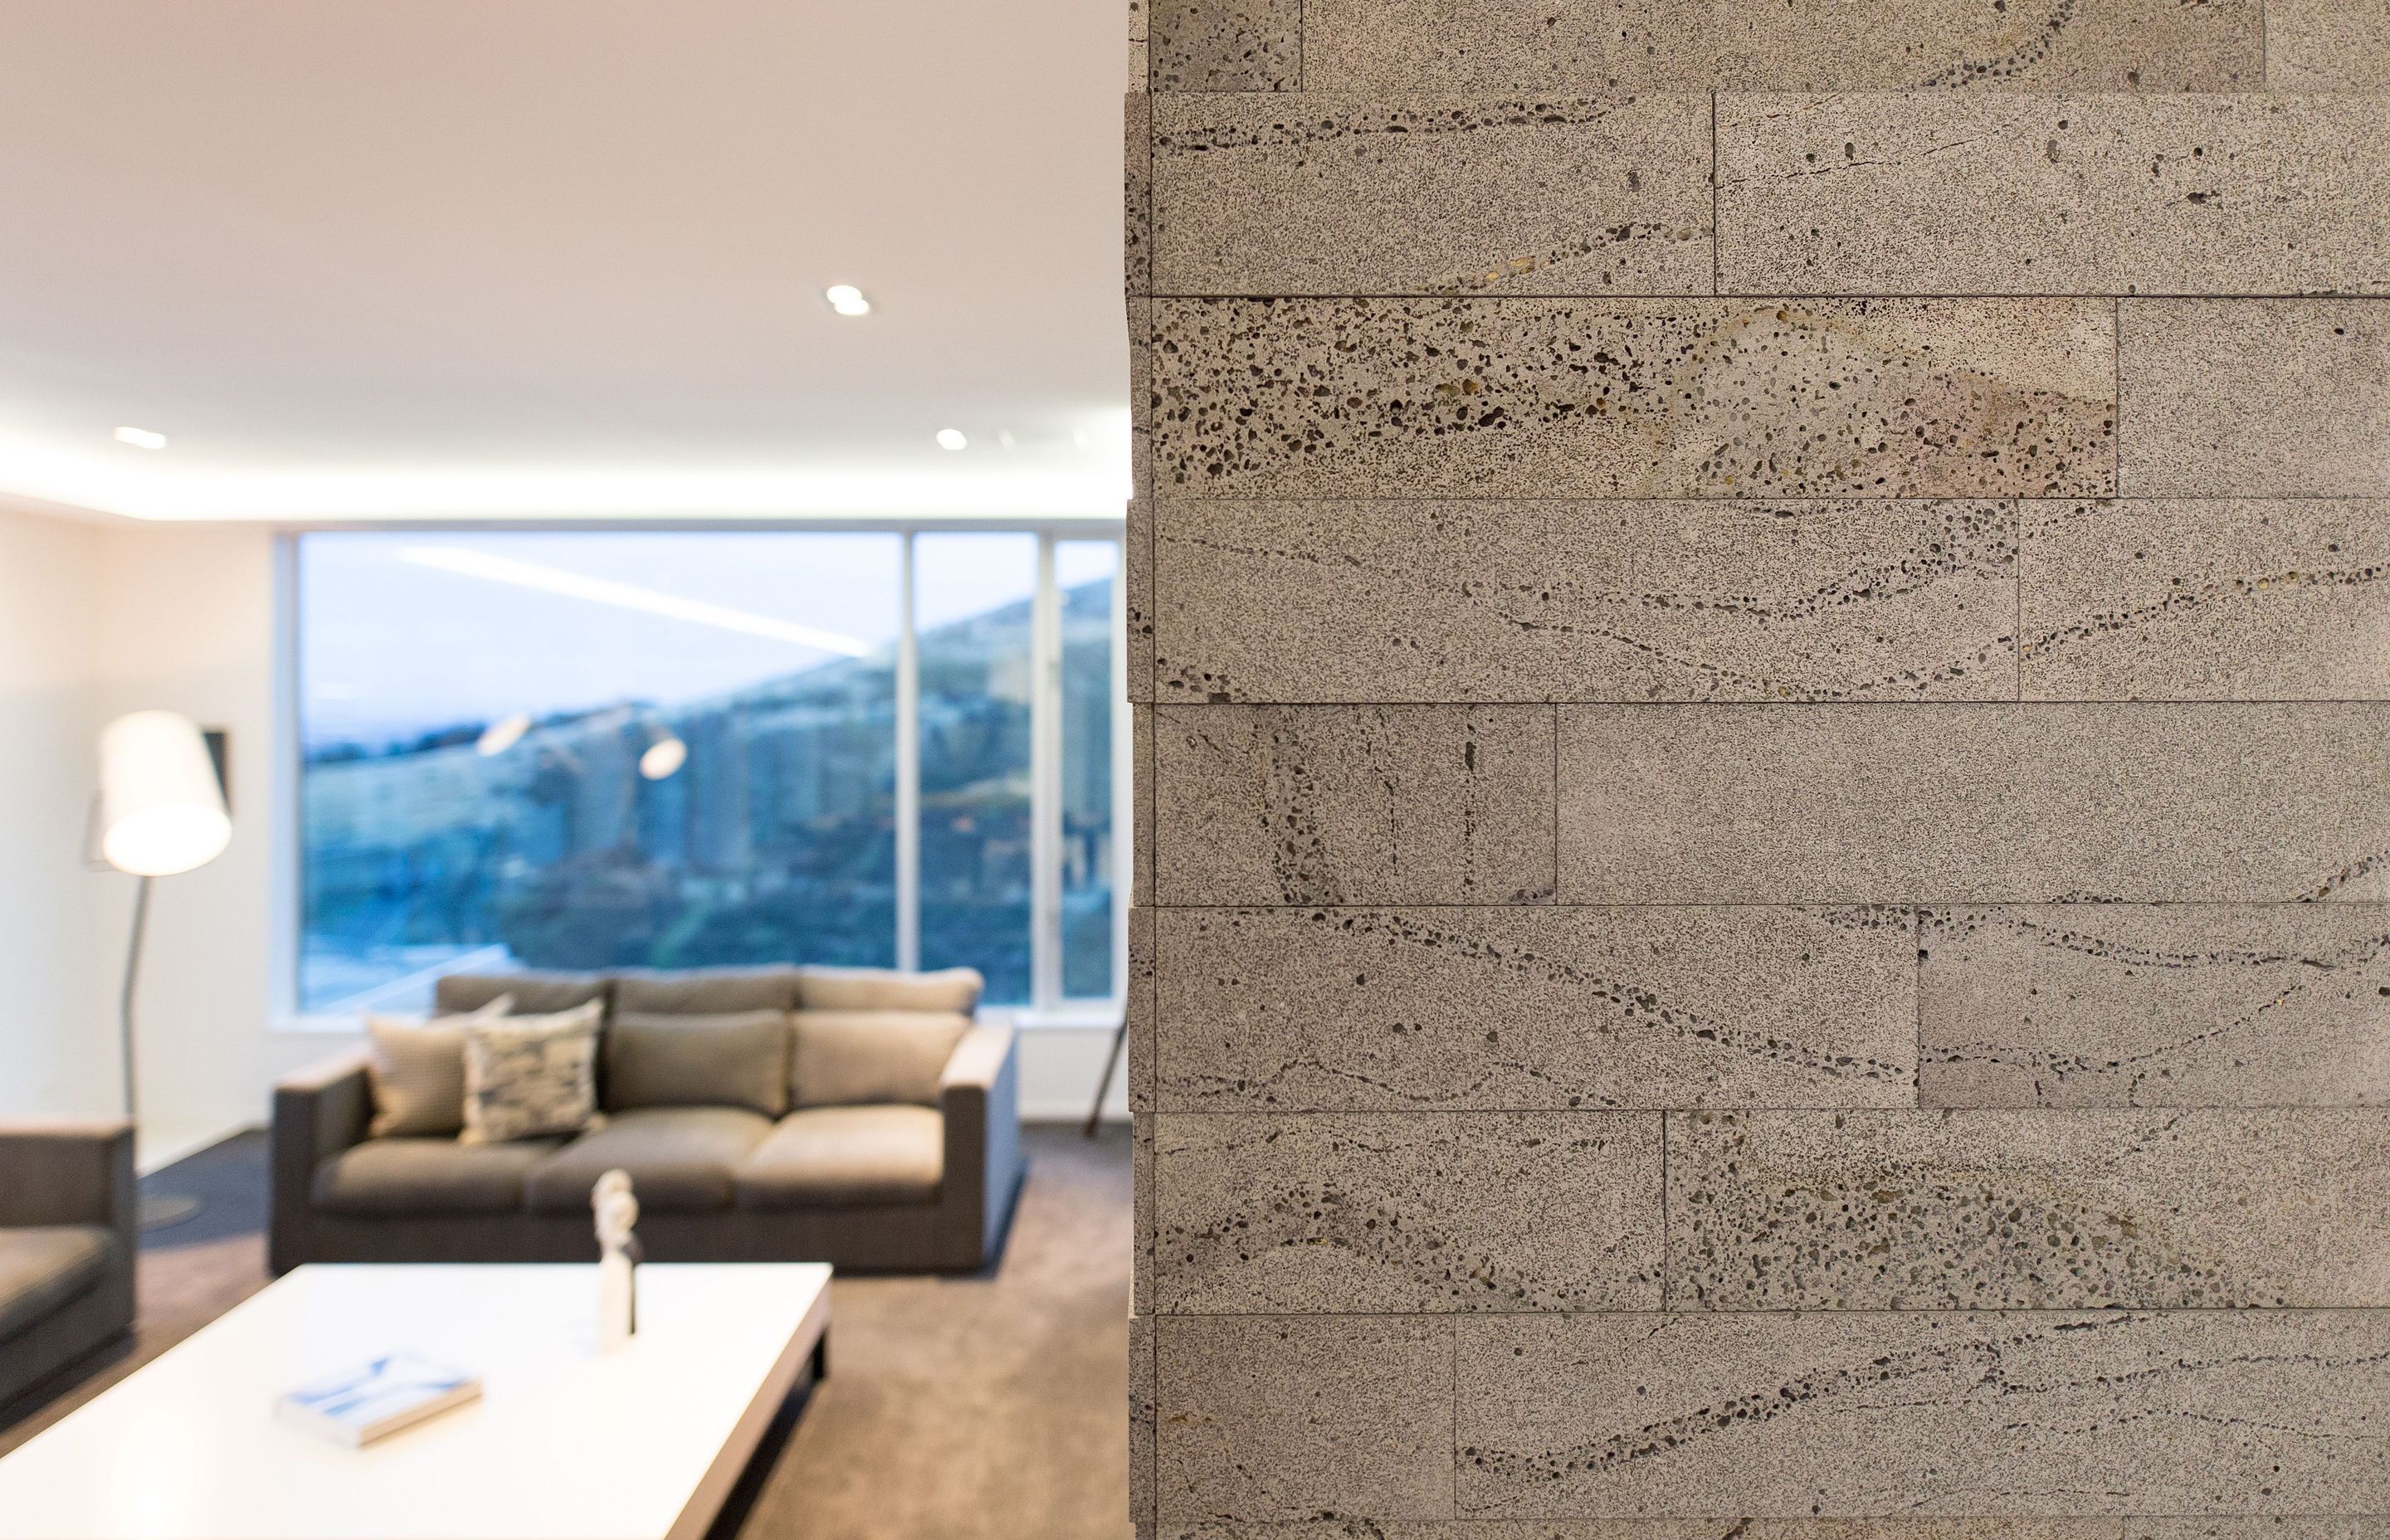 Timaru bluestone in two different depths has been used to clad the fireplace, again mimicking the board-formed concrete exterior.